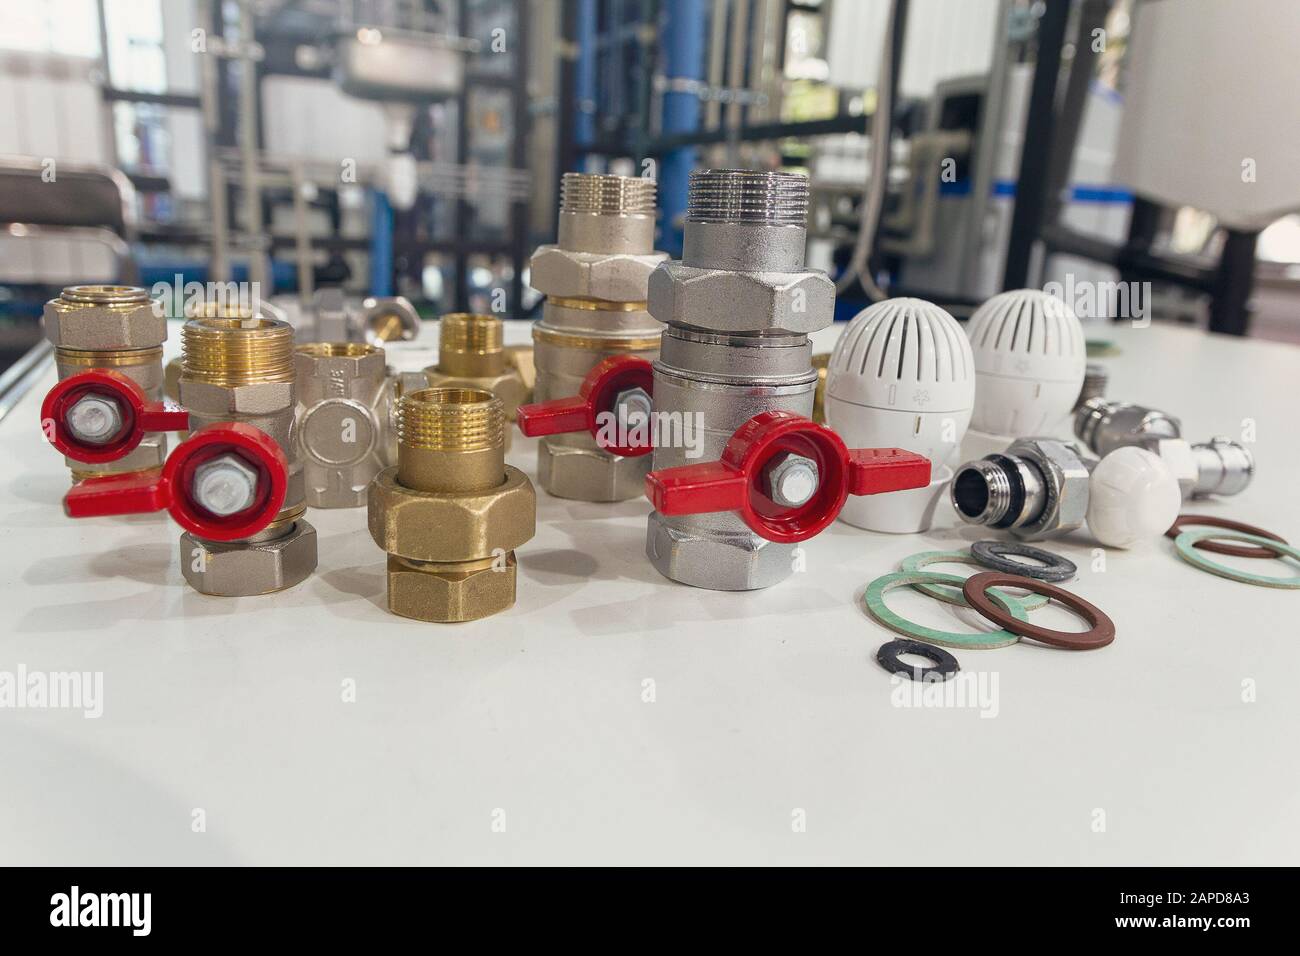 Water valves, fittings and thermostats on the table on the background of other heating equipment Stock Photo